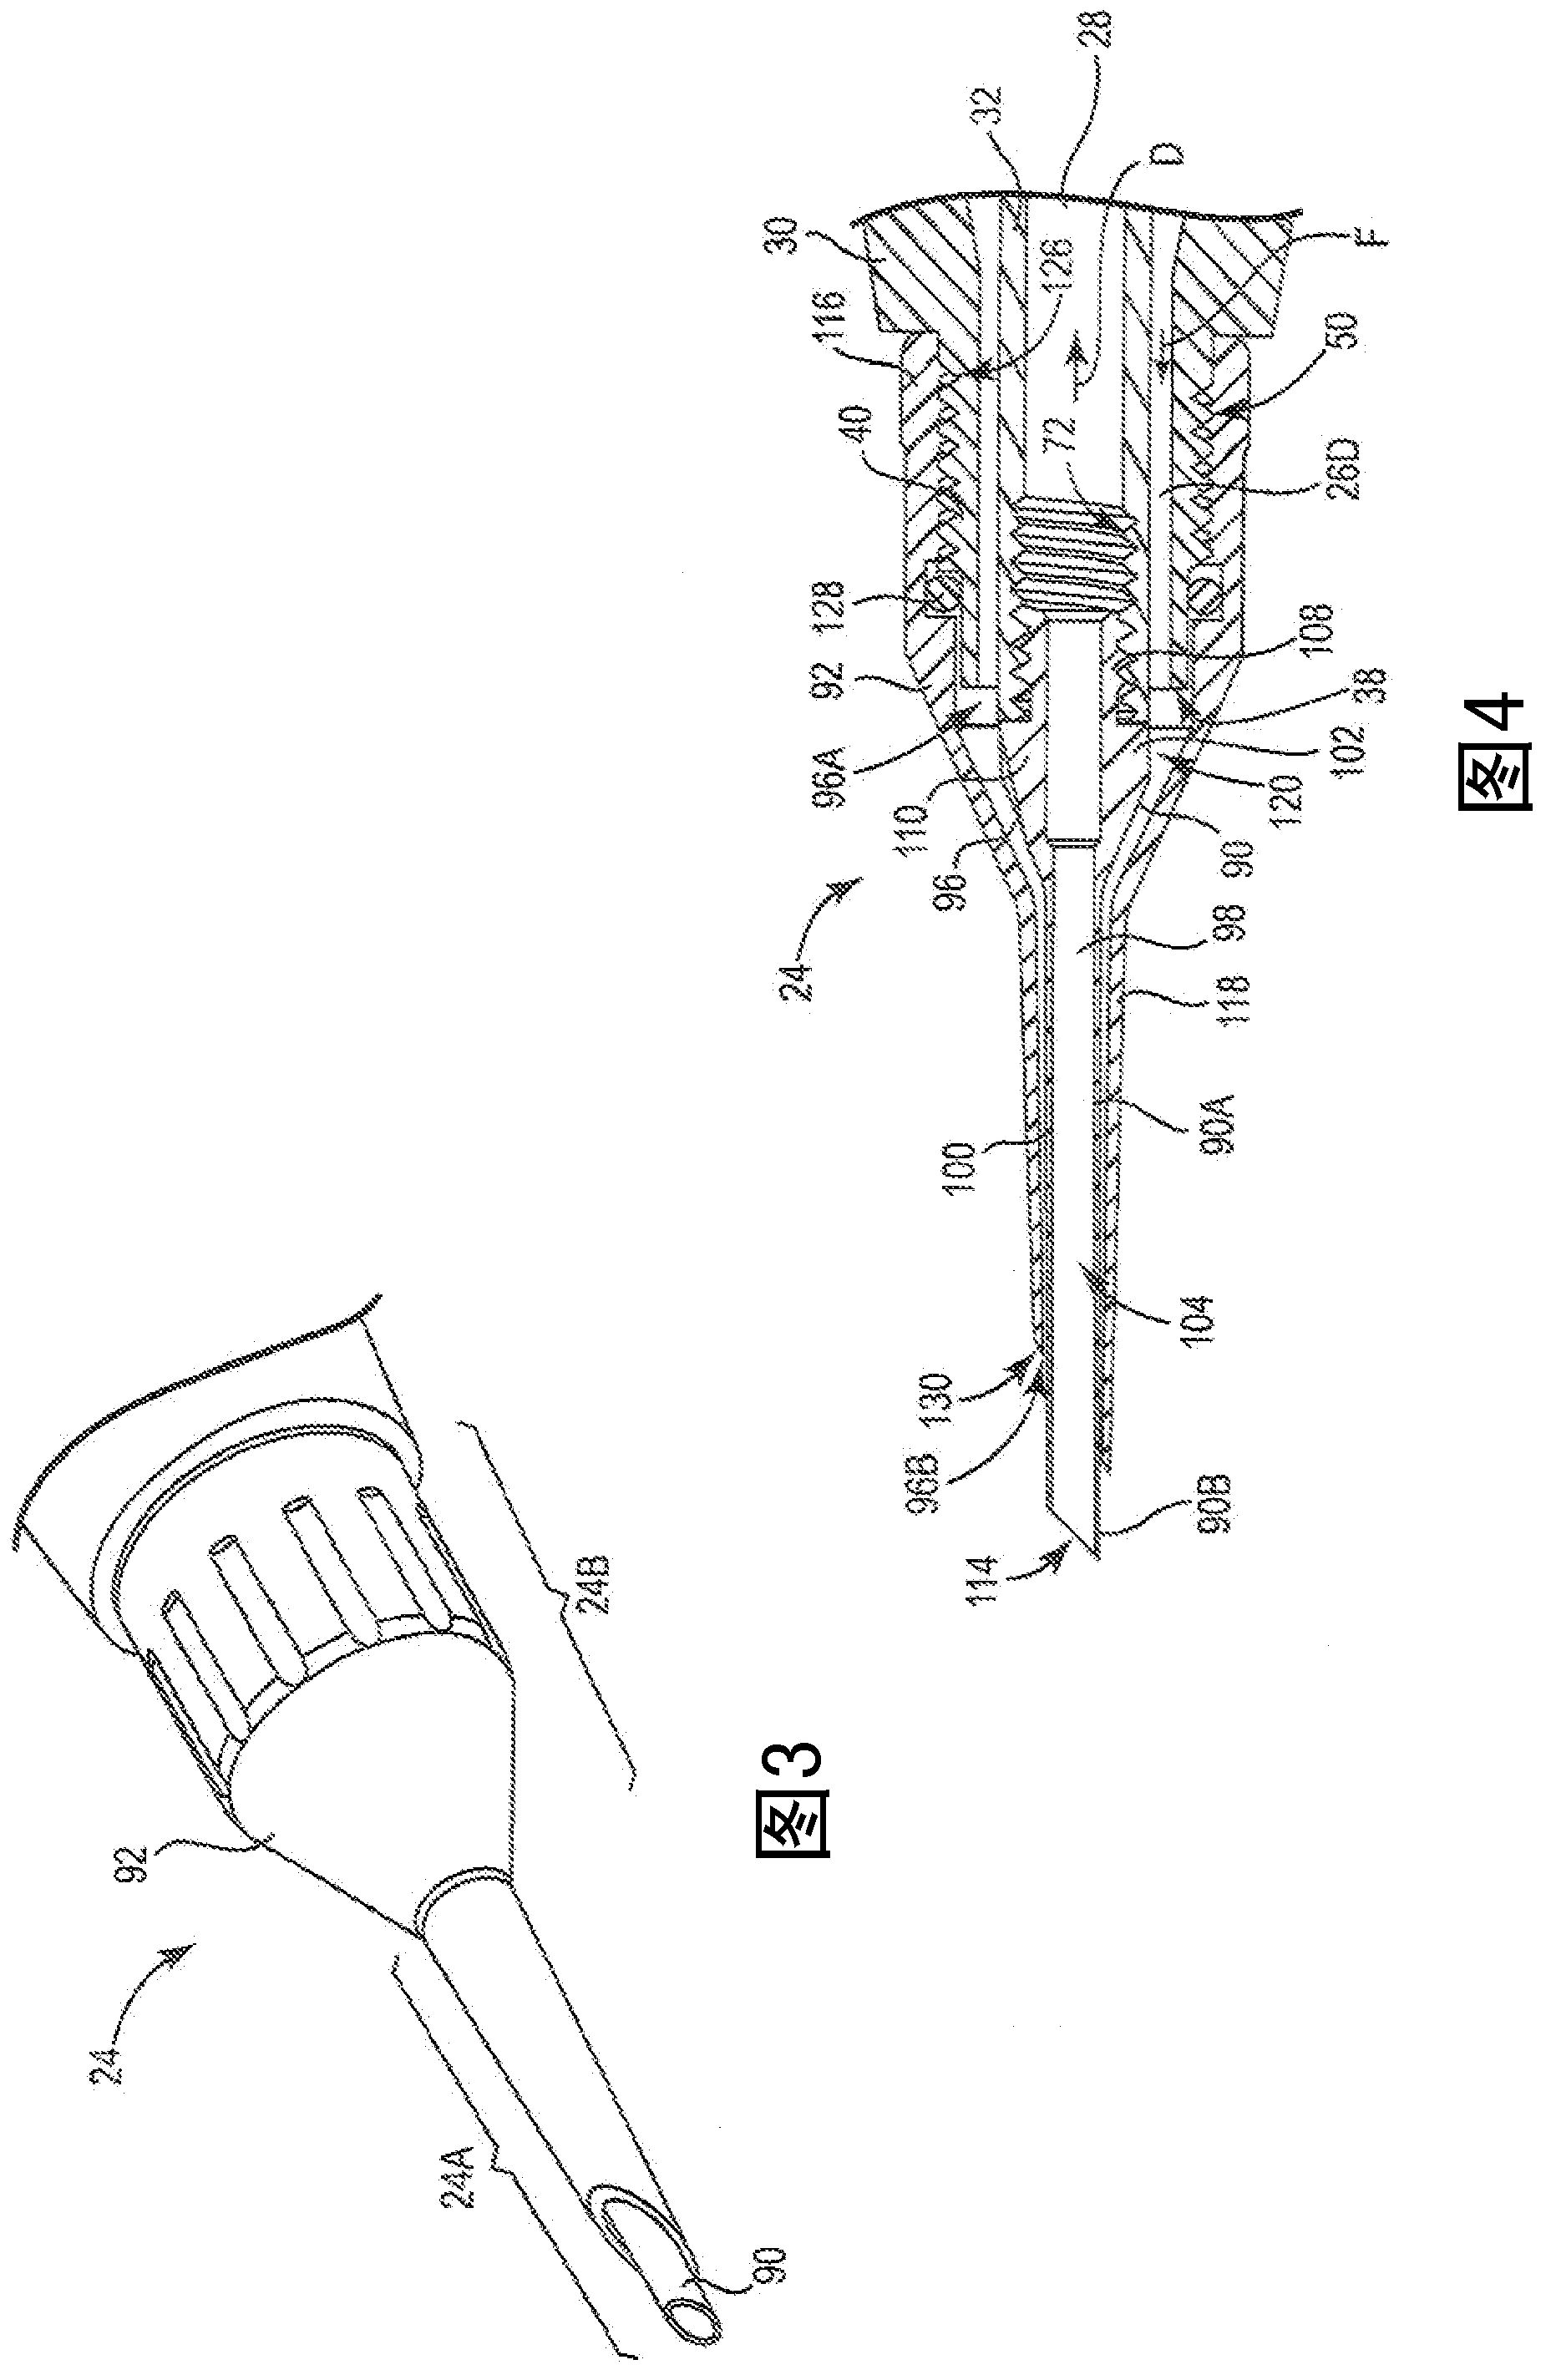 System and method for minimally invasive tissue treatment